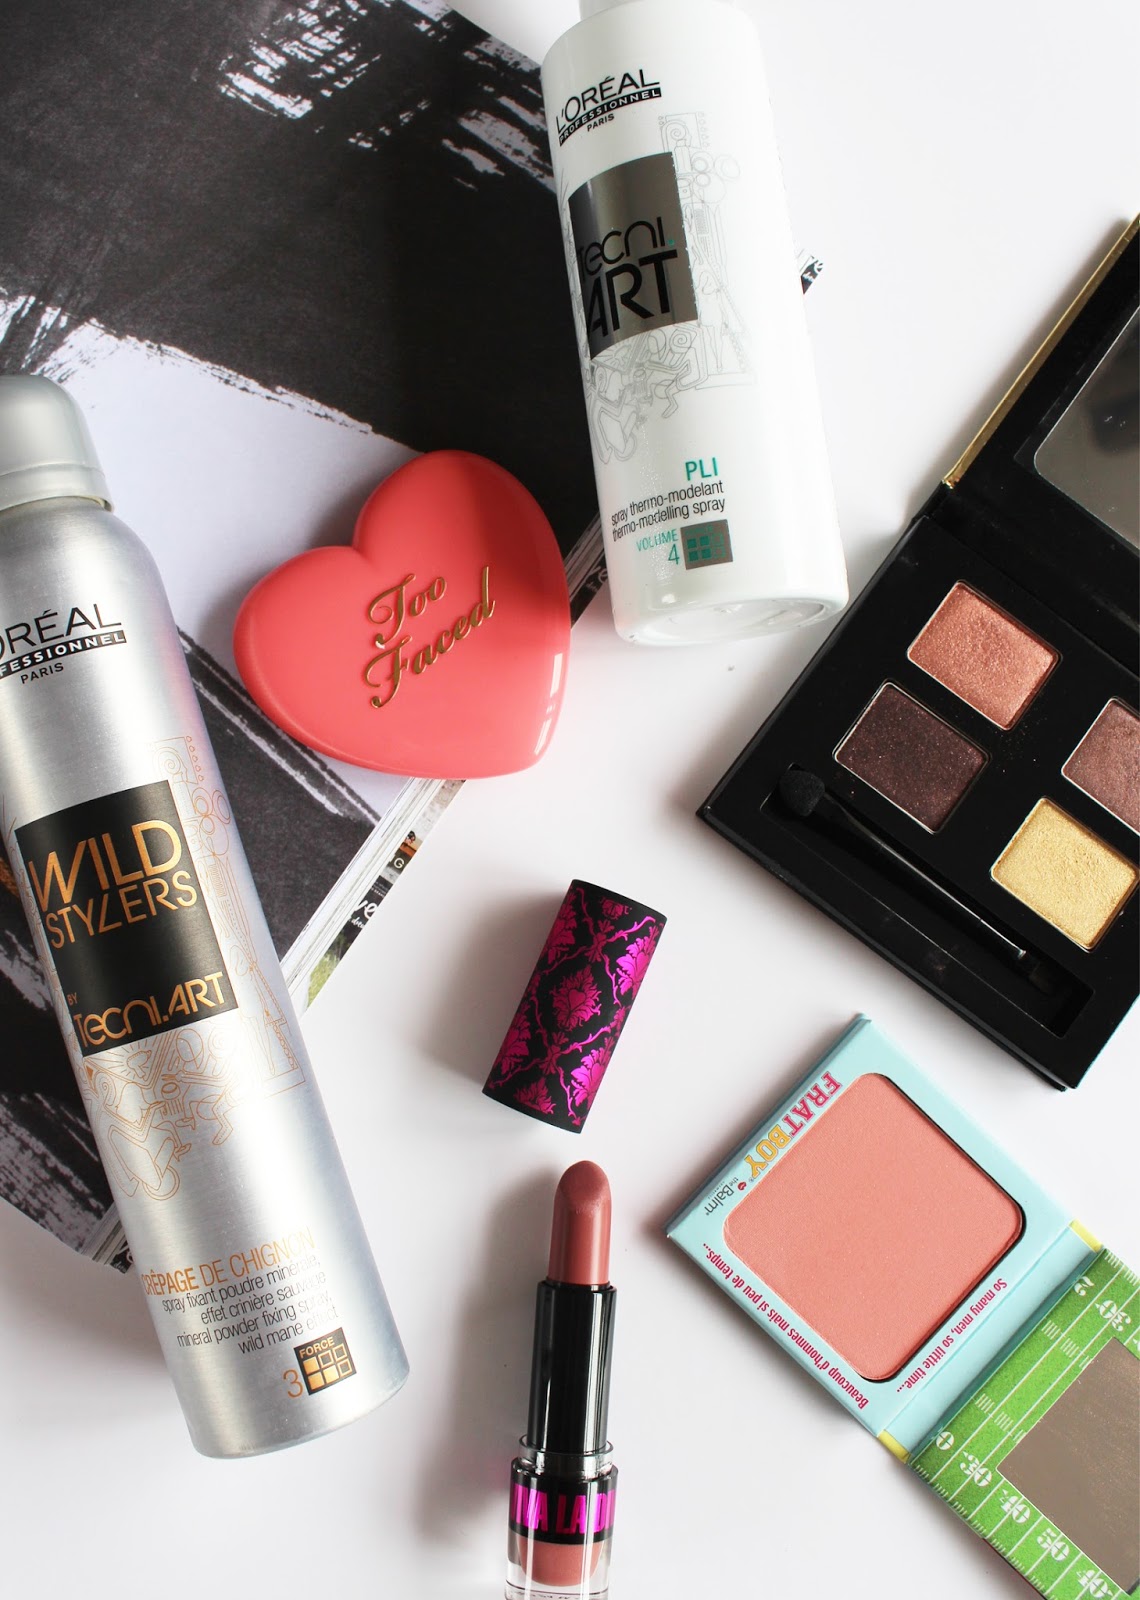 MOST LOVED | NOVEMBER '15 - L'Oreal Professionnel Paris, The Body Shop, The Balm, Too Faced, Chi Chi - CassandraMyee